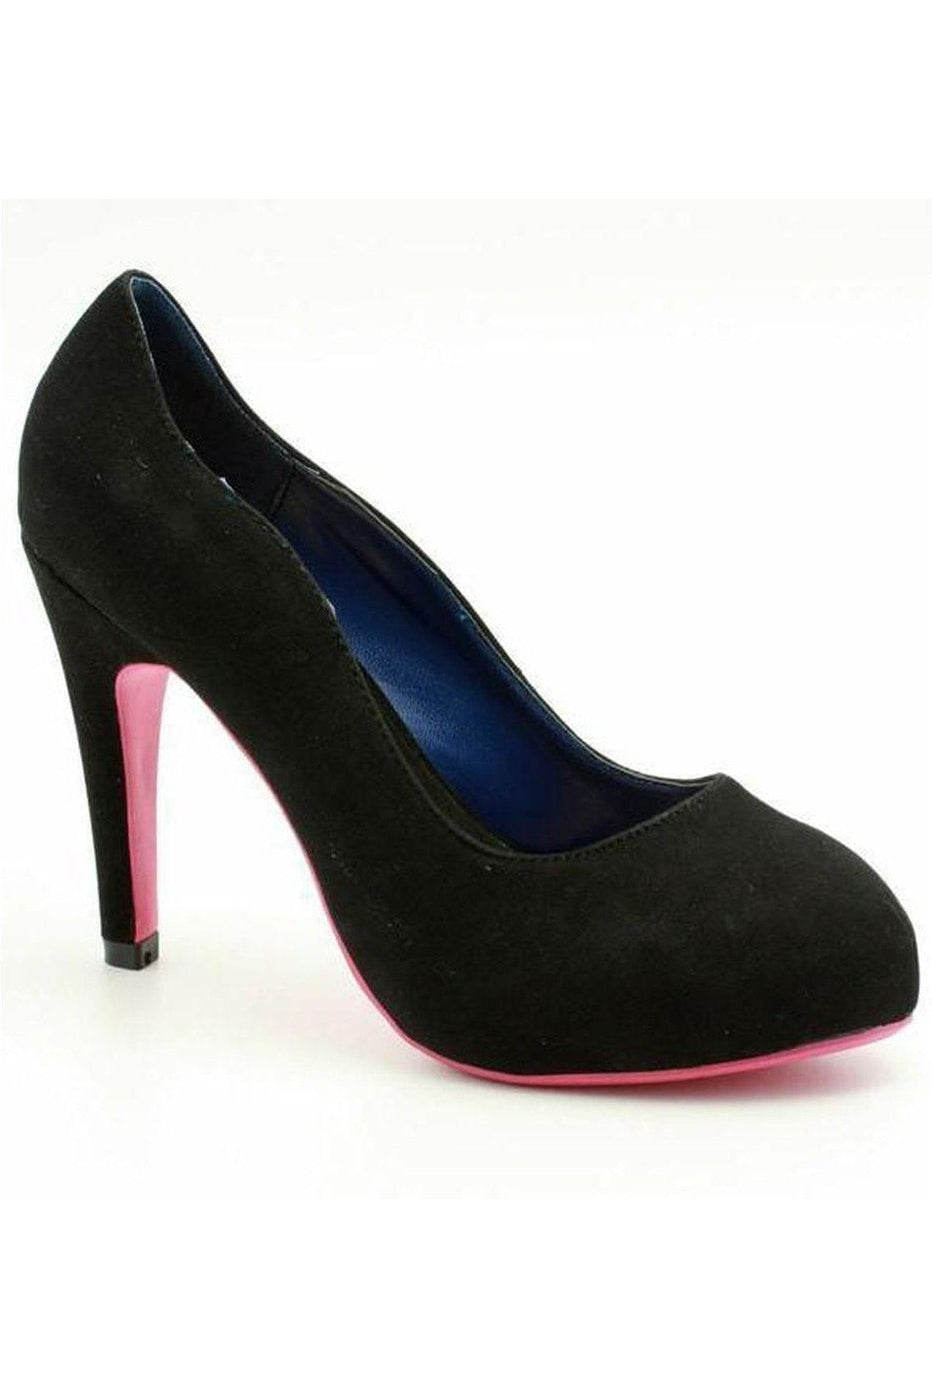 Suede Baby Doll-Black-Sexyshoes Brand-Black-Pumps-SEXYSHOES.COM